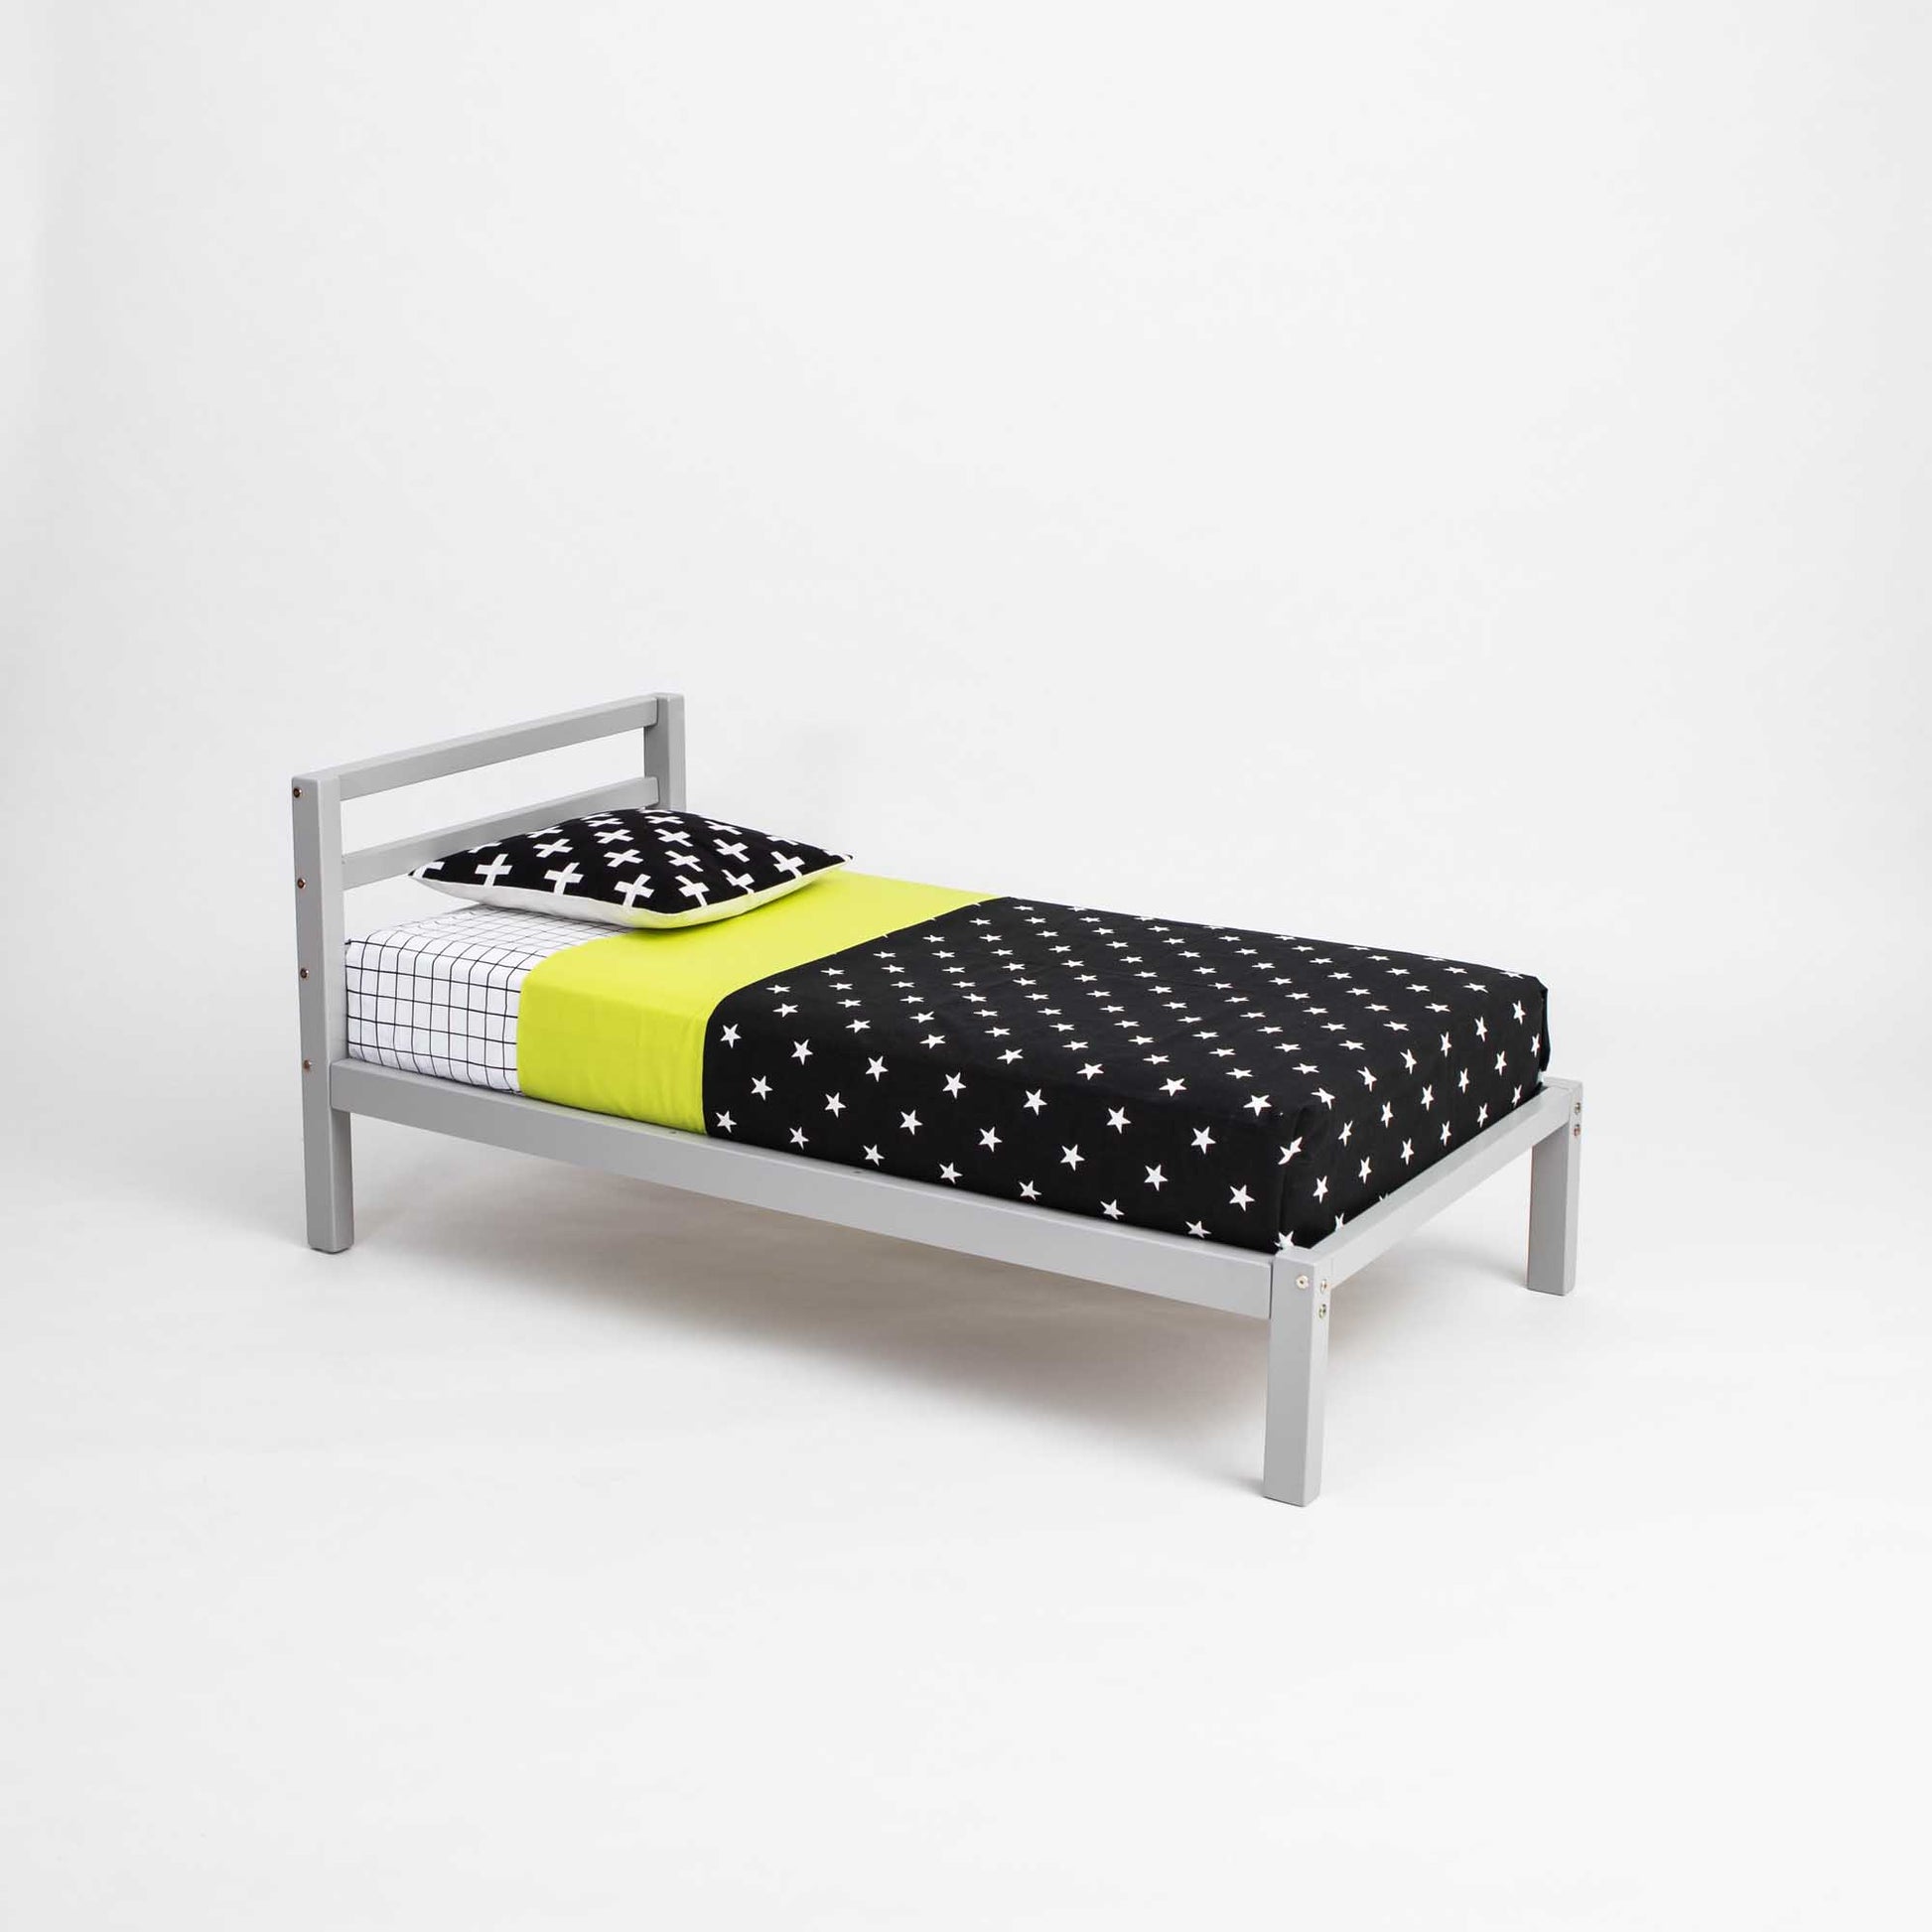 A Sweet Home From Wood Kids' bed on legs with a horizontal rail headboard, with polka dot sheets and a grey frame.